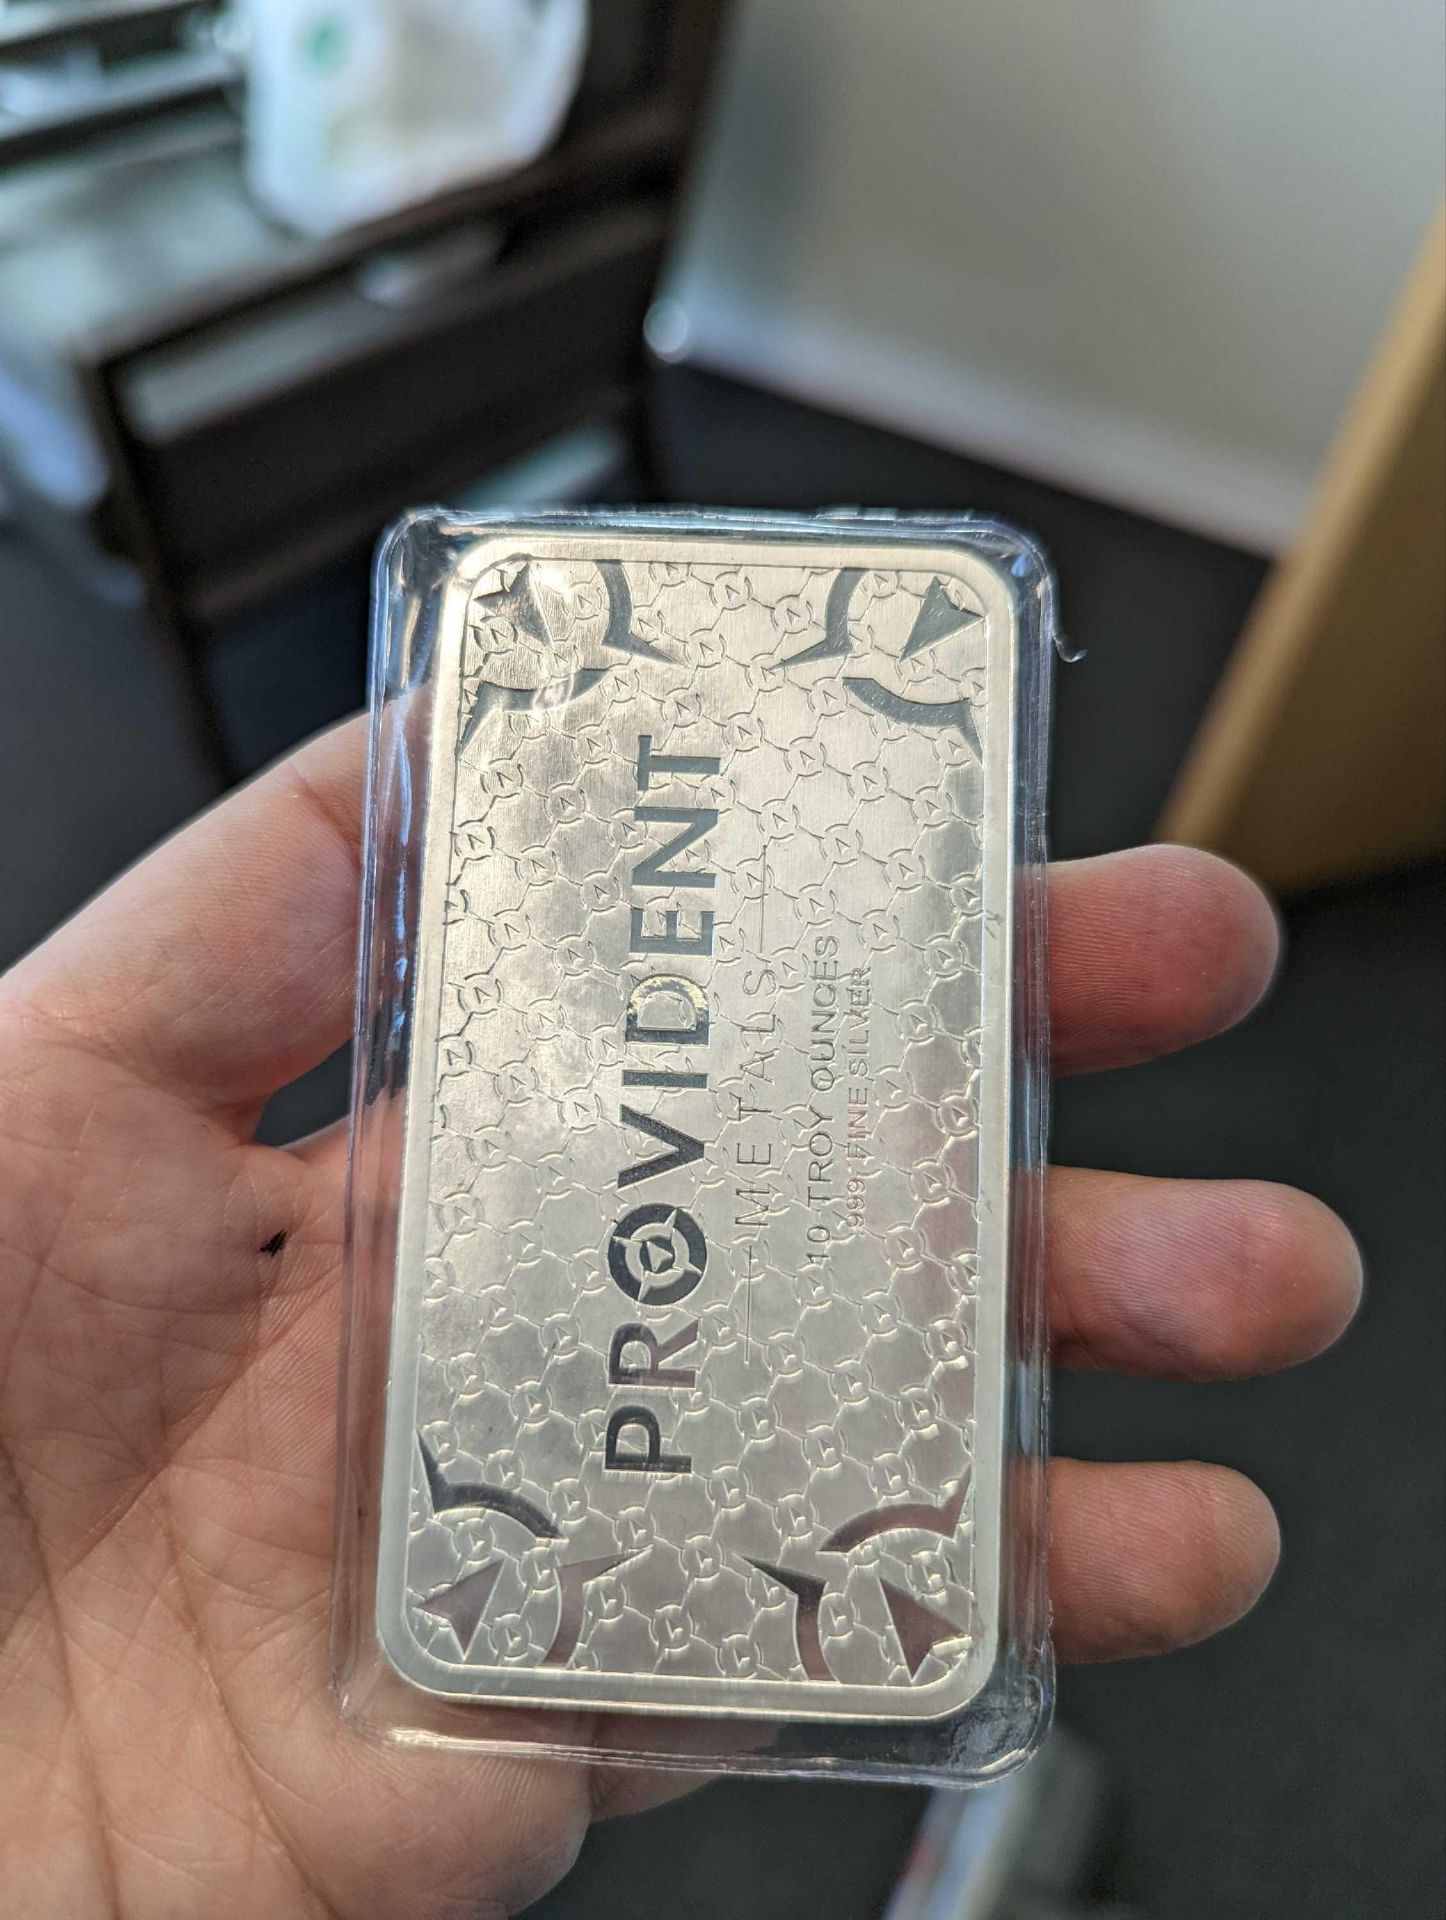 provident 10 oz Silver Bar - Image 3 of 3